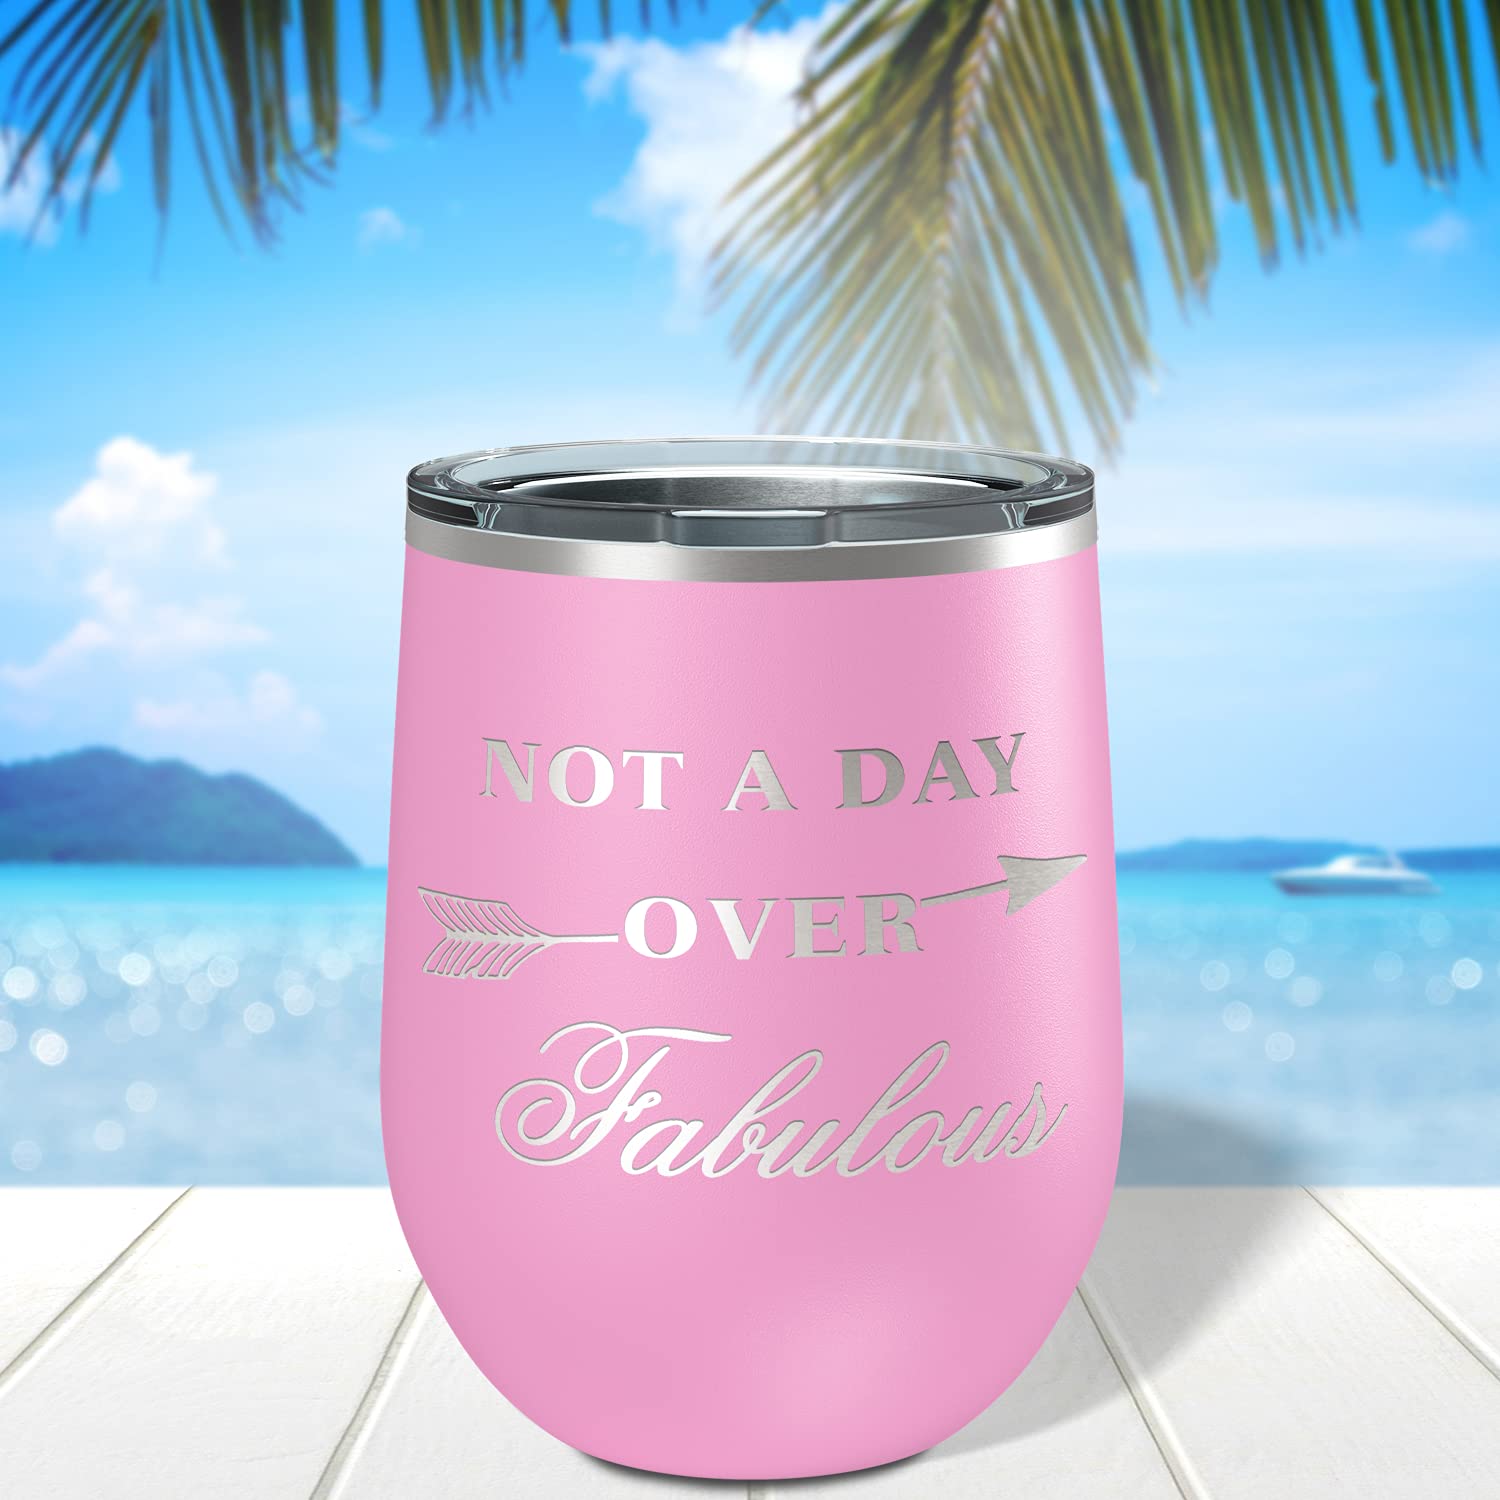 Cuptify Not A Day Over Fabulous Birthday Gift for Women, Friends, Sisters, Moms and Girlfriends Laser Engraved on 12 oz Blush Wine Tumbler